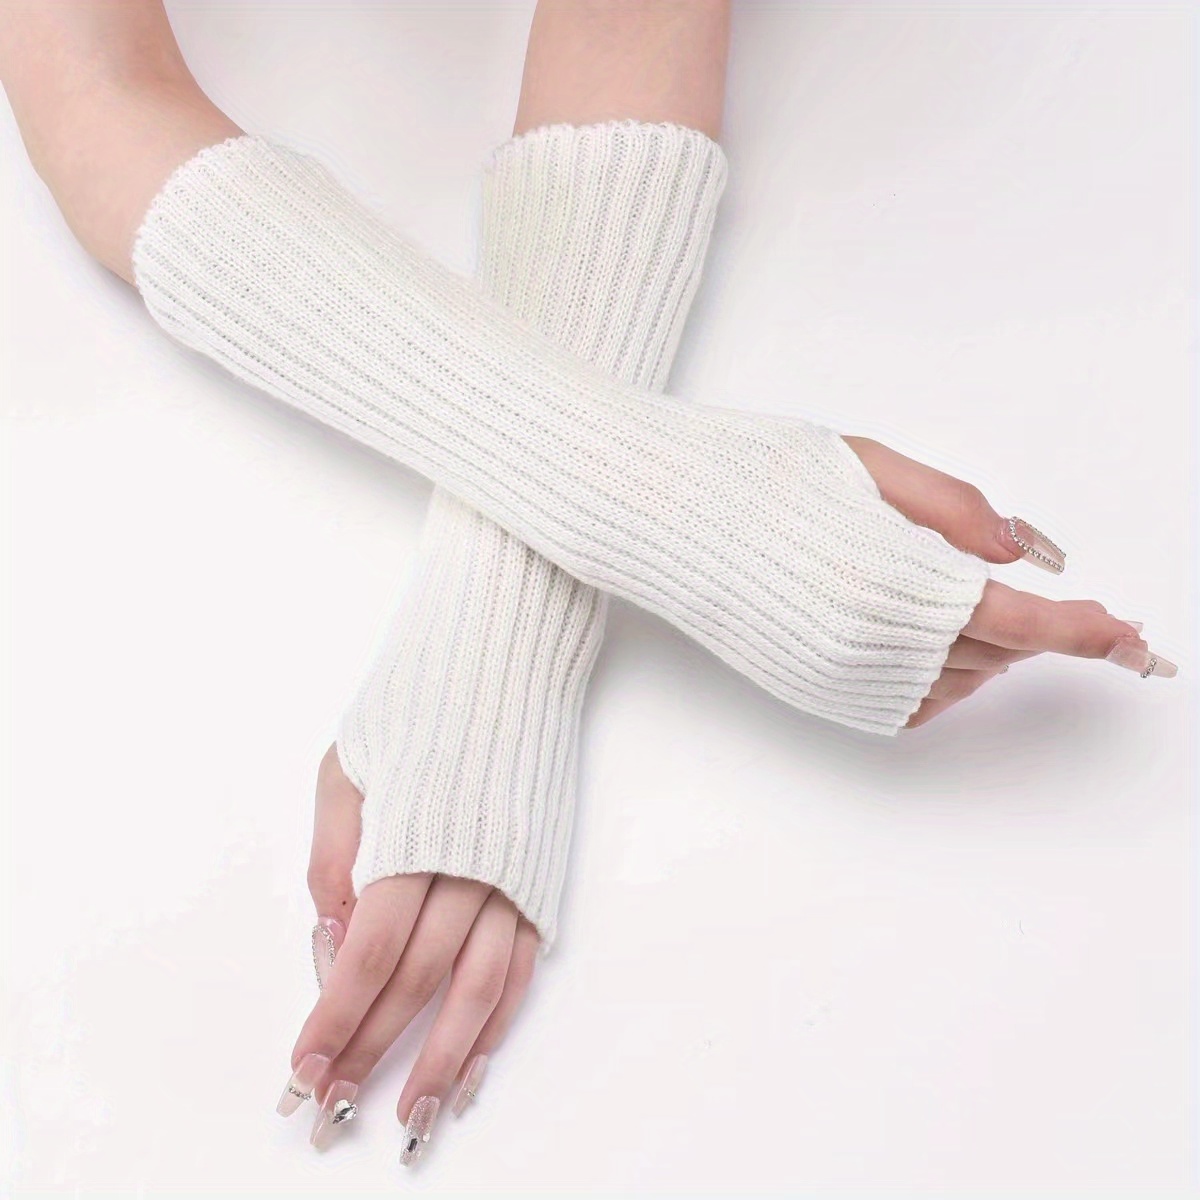 Warm and Stylish Women's Fingerless Long Gloves - Perfect for Outdoor Activities